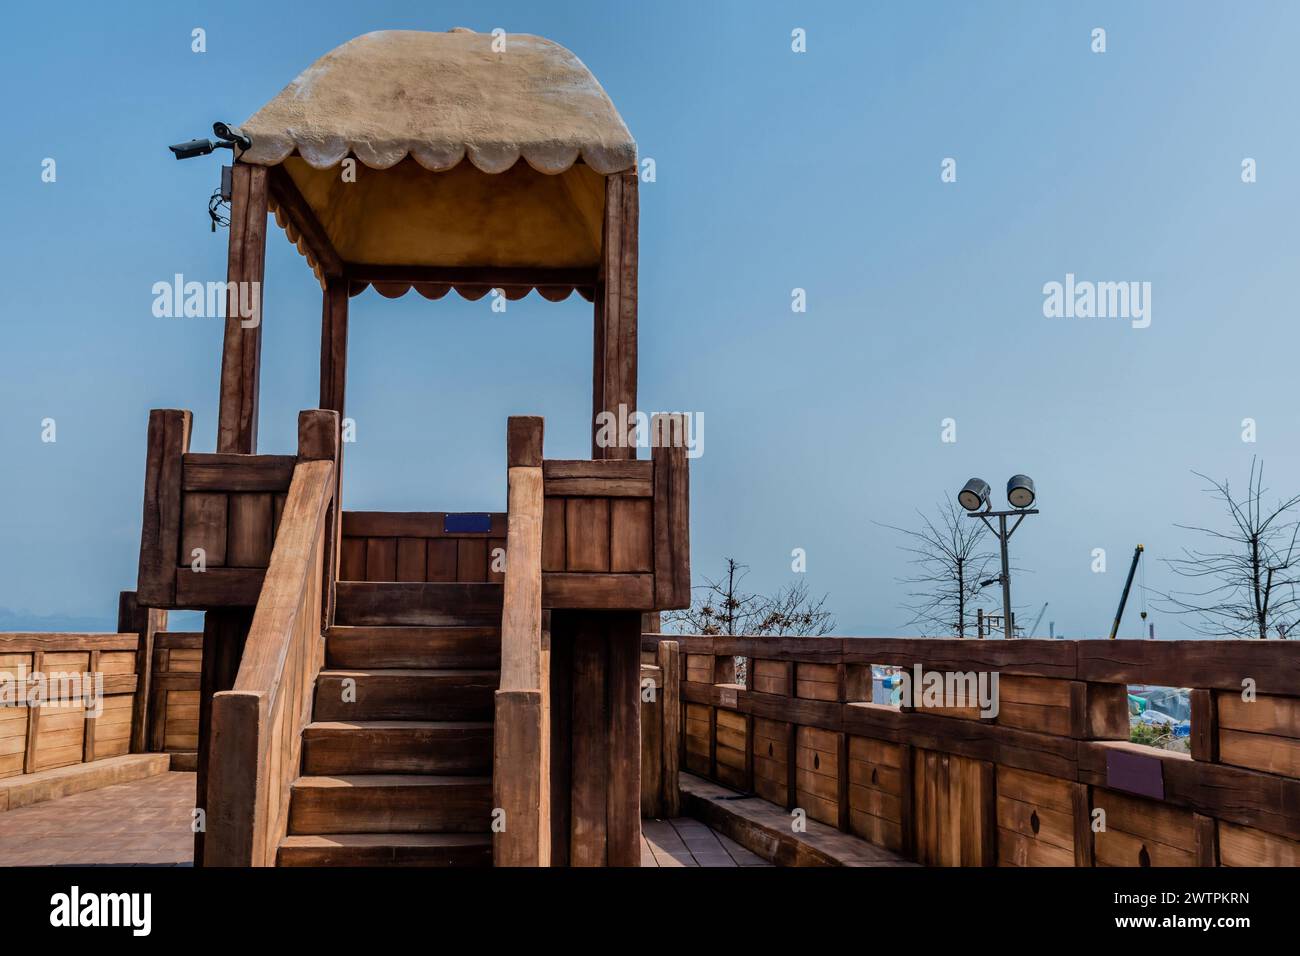 Raised roofed observation platform on deck of replica Panokseon, a Korean oar and sail propelled ship in Seocheon, South Korea Stock Photo